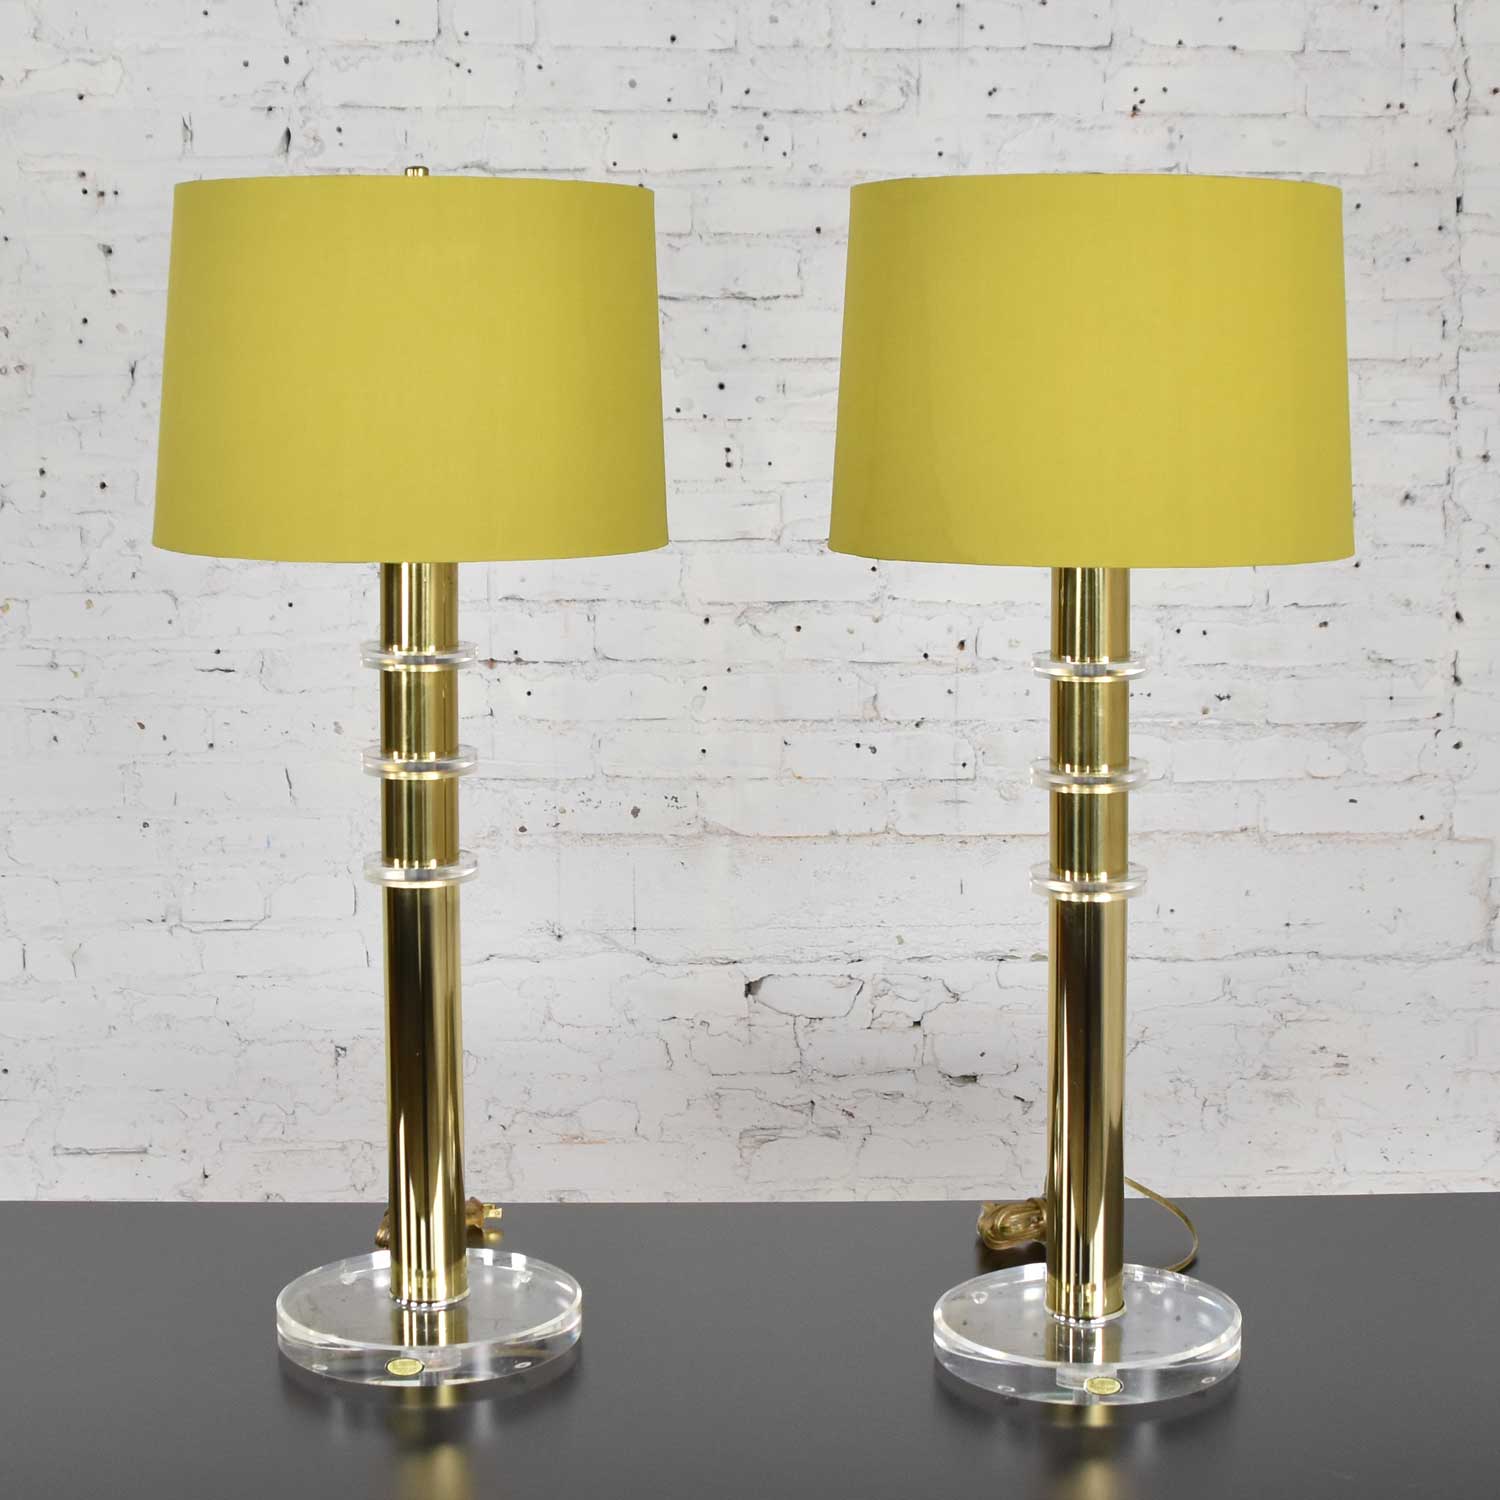 Modern Hollywood Regency Lucite & Brass Plate Lamps Chartreuse Green Shades a Pair Style Karl Springer